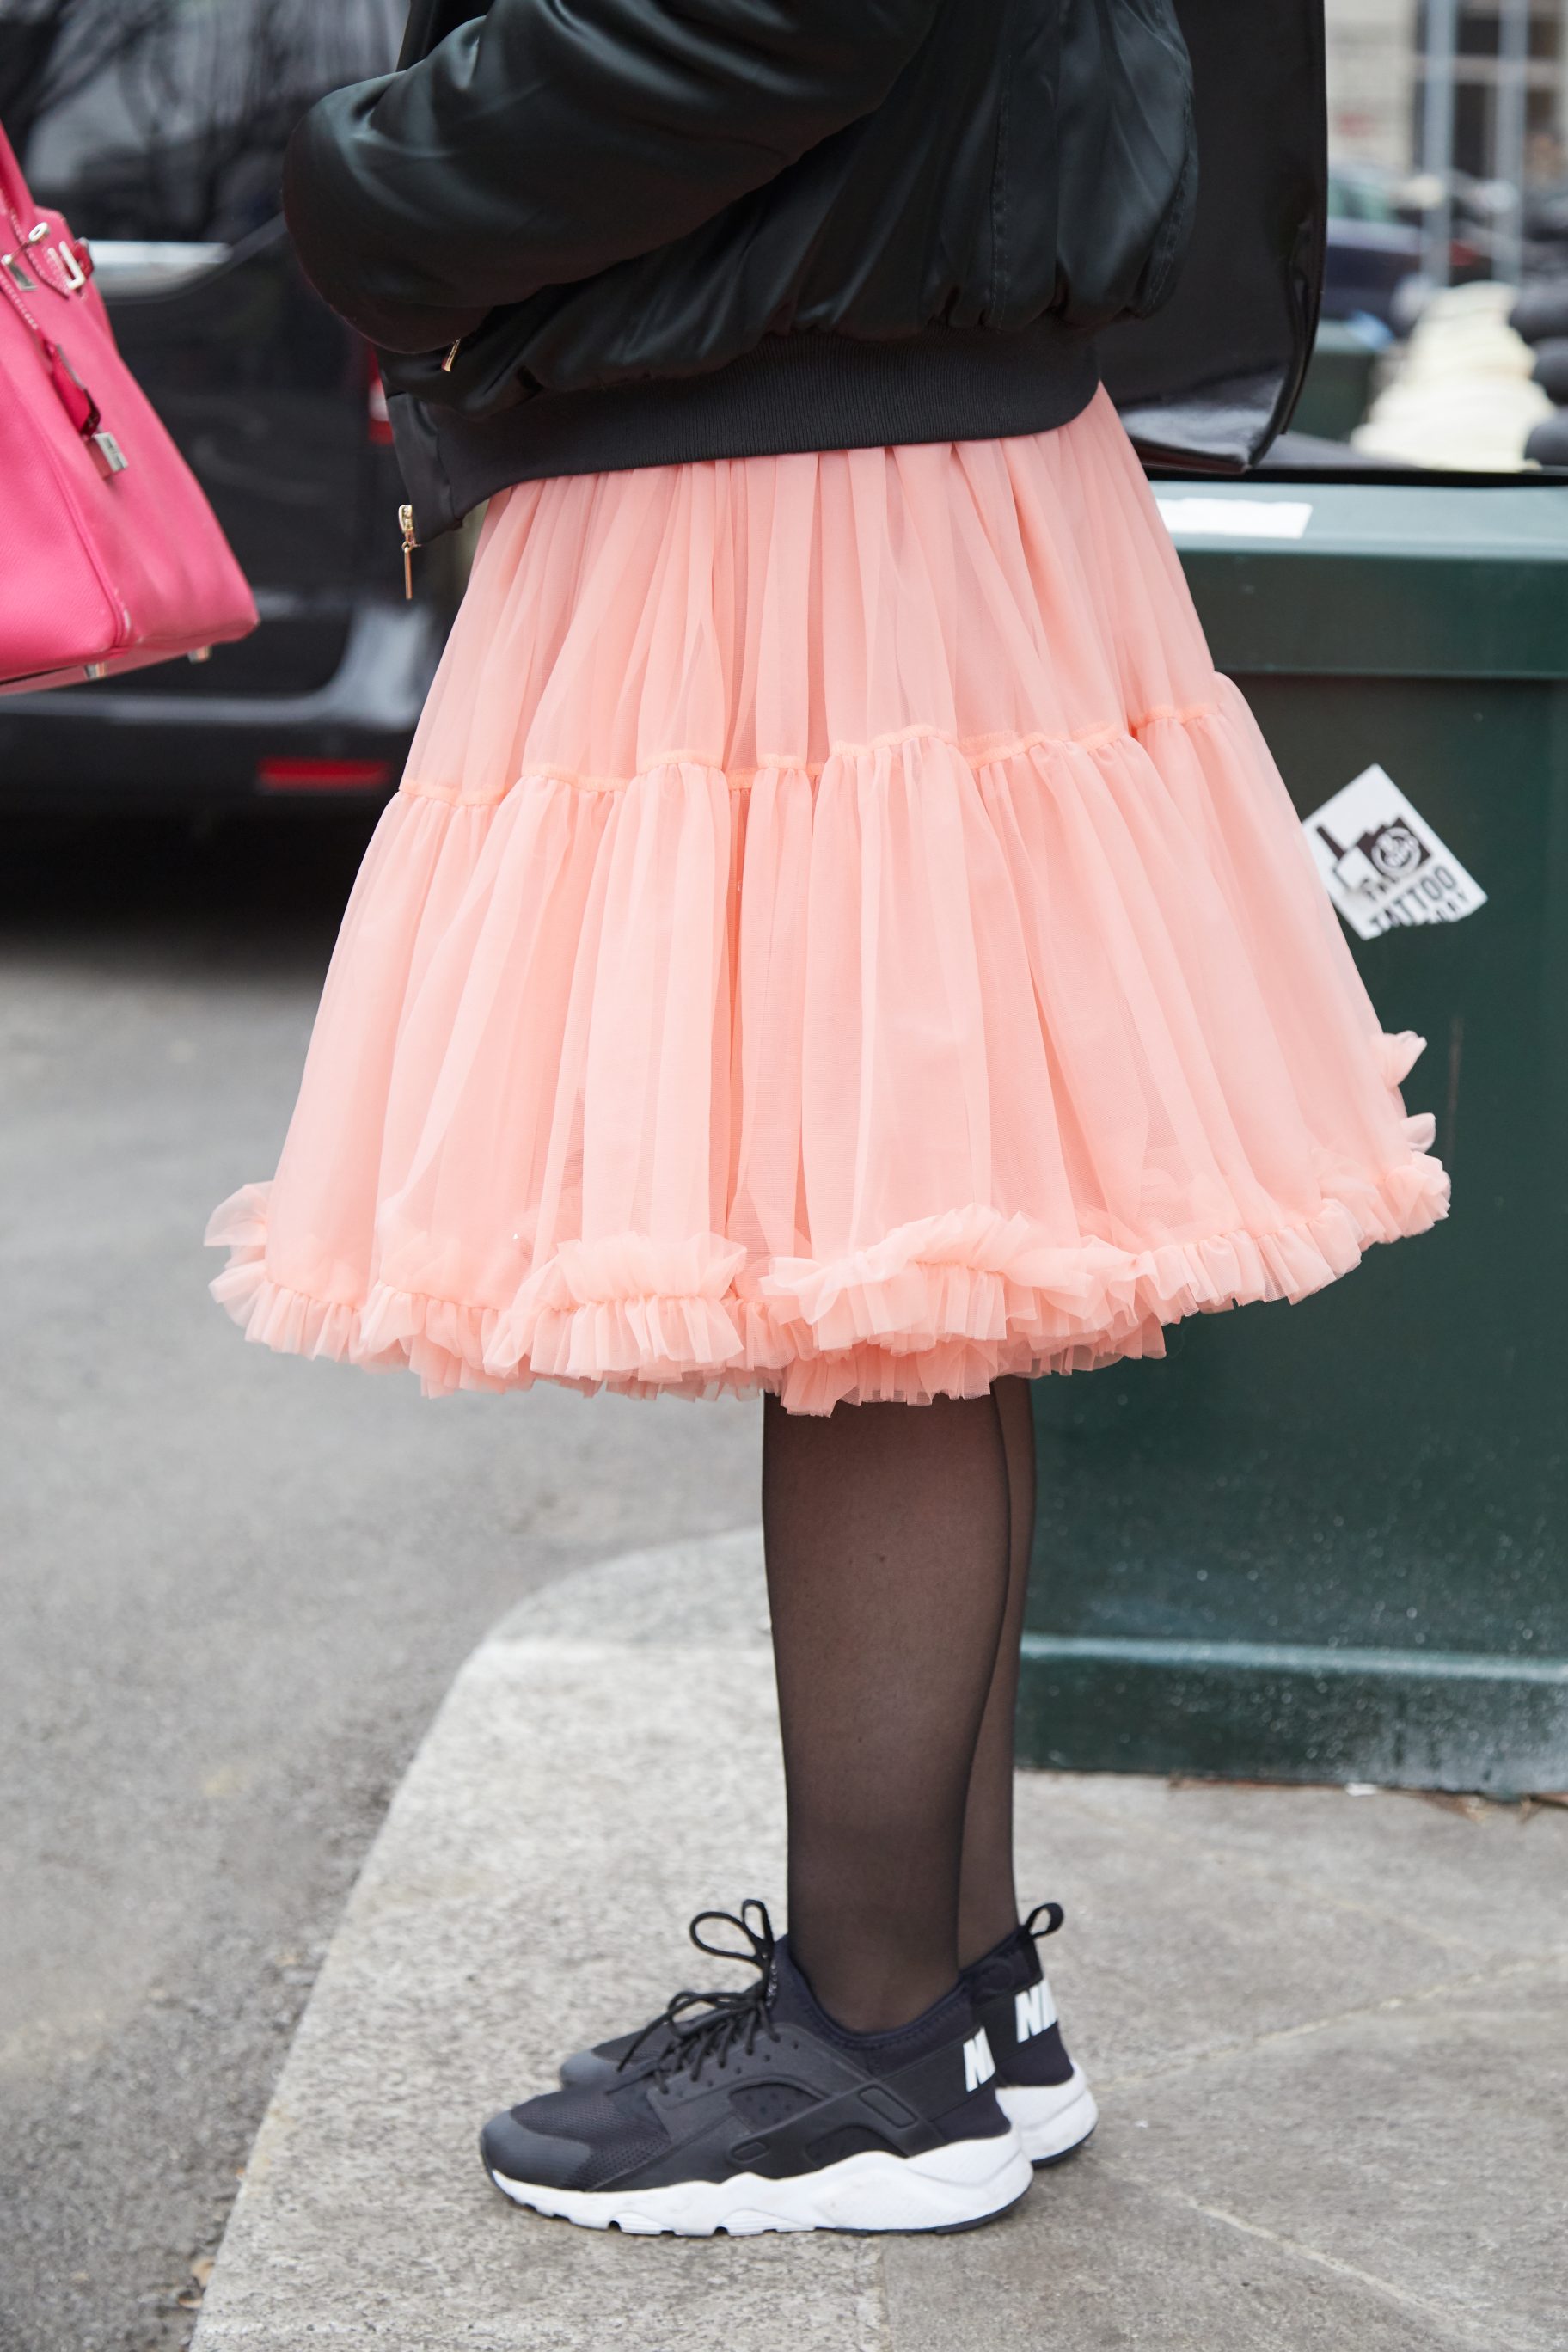 Pink Tulle Skirt And Black And White Nike Sneakers